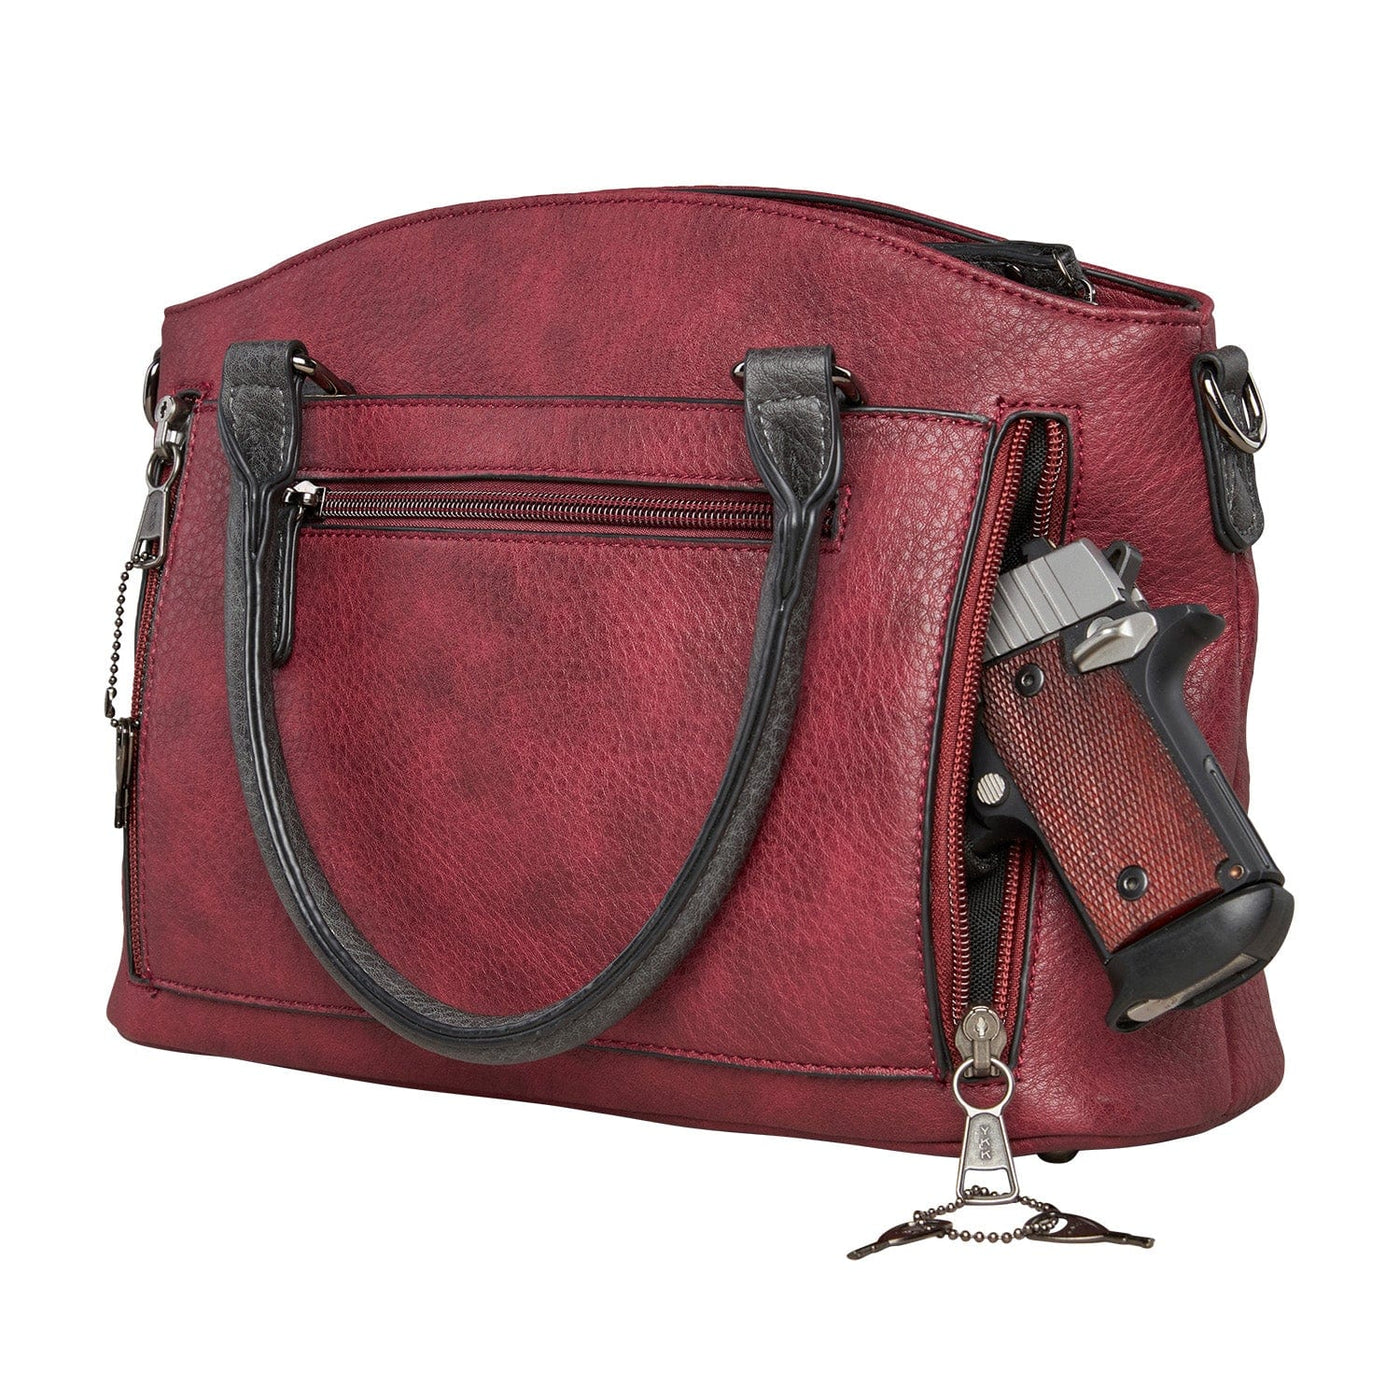 Concealed Carry Carly Satchel by Lady Conceal - YKK Locking Zippers - designer concealed carry purse - Glock 19 purse - conceal and cary purse for women - Locking Conceal and Carry Purse with Universal Holster for Handguns - Unique Hidden Gun and Pistol Bag